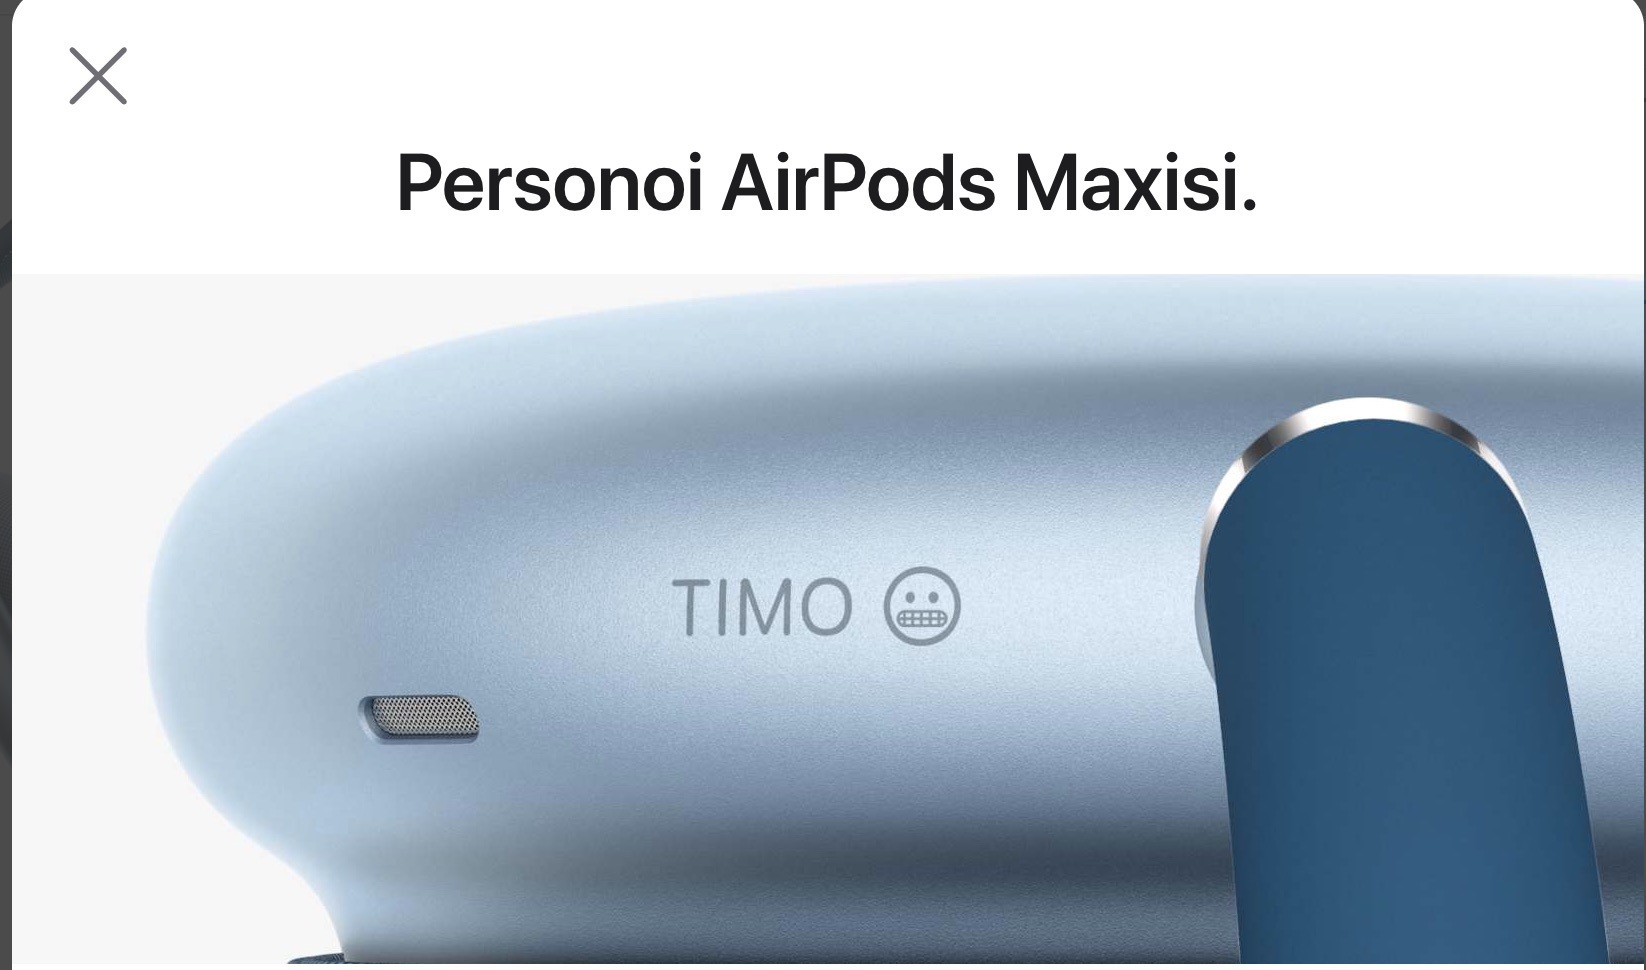 Airpods Max personalization page with text “Timo” and a grimacing emoji